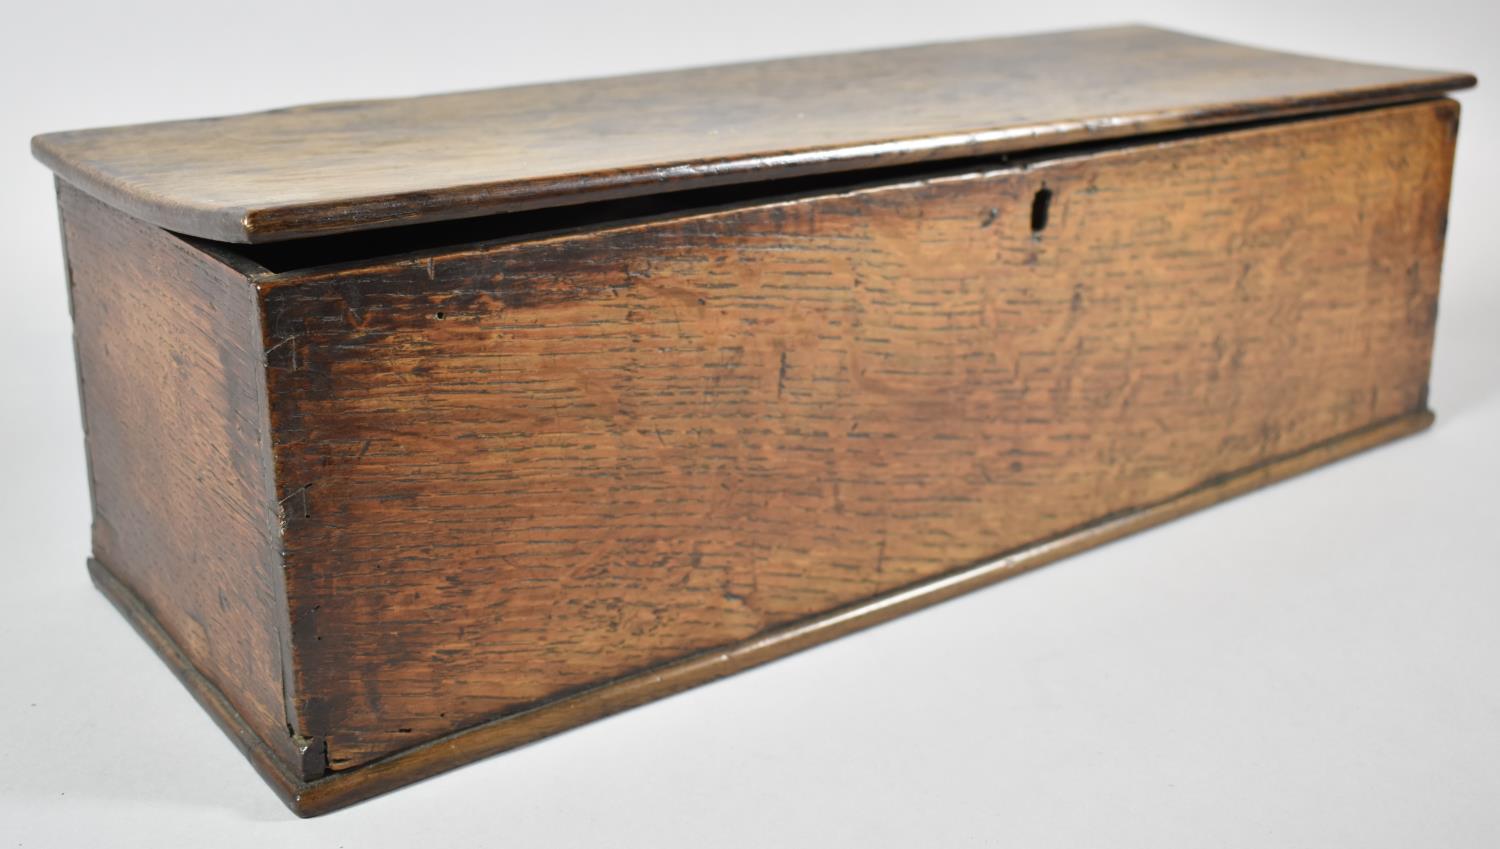 An Early 19th Century Oak Rectangular Box Containing Various Knitting Needles, Sewing Accessories